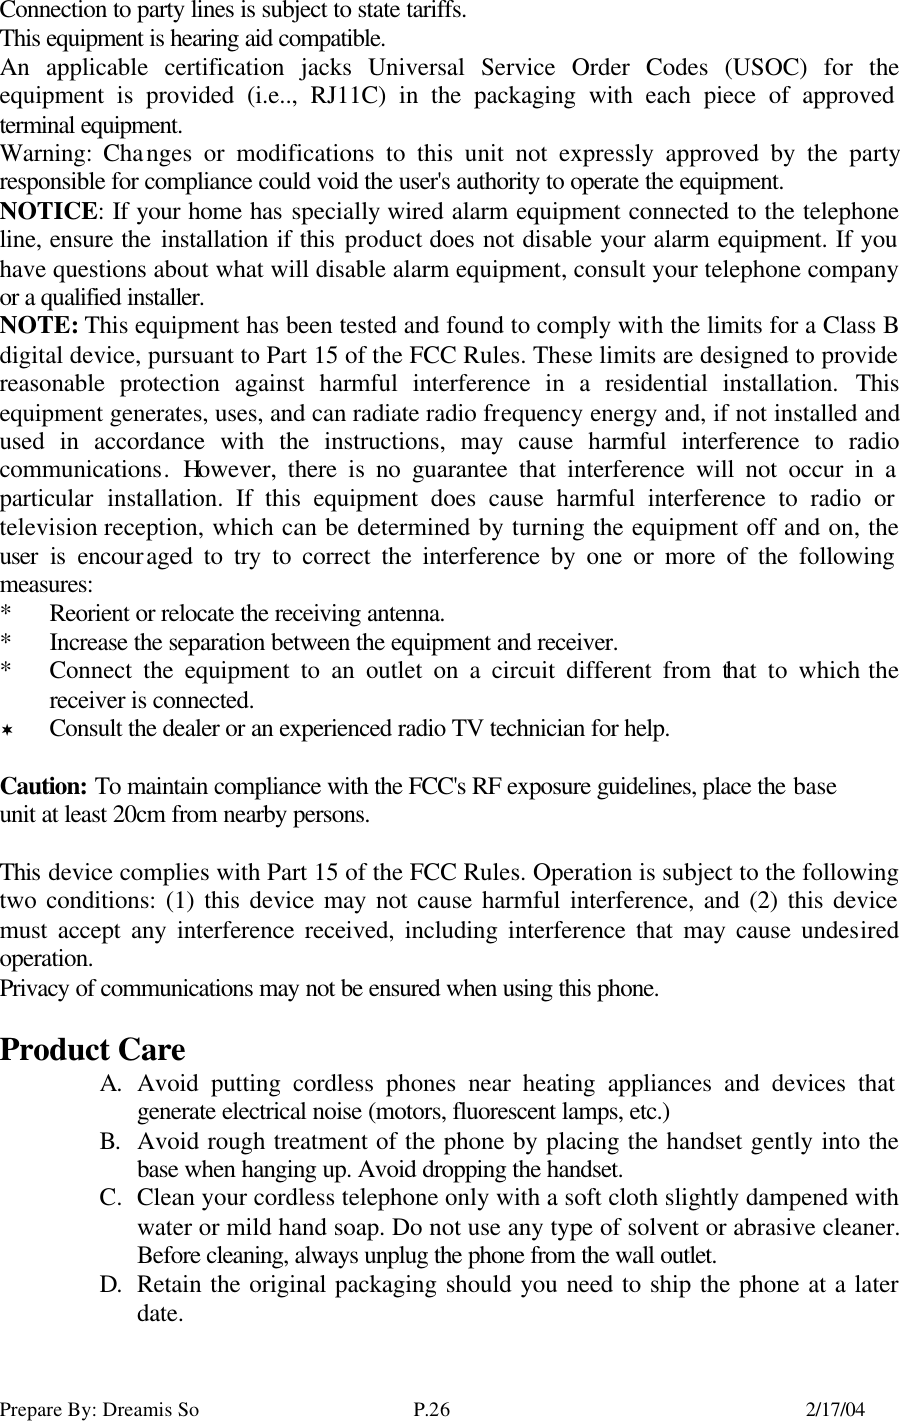 Prepare By: Dreamis So P.26    2/17/04 Connection to party lines is subject to state tariffs. This equipment is hearing aid compatible. An applicable certification jacks Universal Service Order Codes (USOC) for the equipment is provided (i.e.., RJ11C) in the packaging with each piece of approved terminal equipment. Warning: Changes or modifications to this unit not expressly approved by the party responsible for compliance could void the user&apos;s authority to operate the equipment. NOTICE: If your home has specially wired alarm equipment connected to the telephone line, ensure the installation if this product does not disable your alarm equipment. If you have questions about what will disable alarm equipment, consult your telephone company or a qualified installer. NOTE: This equipment has been tested and found to comply with the limits for a Class B digital device, pursuant to Part 15 of the FCC Rules. These limits are designed to provide reasonable protection against harmful interference in a residential installation. This equipment generates, uses, and can radiate radio frequency energy and, if not installed and used in accordance with the instructions, may cause harmful interference to radio communications. However, there is no guarantee that interference will not occur in a particular installation. If this equipment does cause harmful interference to radio or television reception, which can be determined by turning the equipment off and on, the user is encouraged to try to correct the interference by one or more of the following measures: *  Reorient or relocate the receiving antenna. *  Increase the separation between the equipment and receiver. *  Connect the equipment to an outlet on a circuit different from that to which the receiver is connected. ¬ Consult the dealer or an experienced radio TV technician for help.  Caution: To maintain compliance with the FCC&apos;s RF exposure guidelines, place the base unit at least 20cm from nearby persons.      This device complies with Part 15 of the FCC Rules. Operation is subject to the following two conditions: (1) this device may not cause harmful interference, and (2) this device must accept any interference received, including interference that may cause undesired operation. Privacy of communications may not be ensured when using this phone.  Product Care A. Avoid putting cordless phones near heating appliances and devices that generate electrical noise (motors, fluorescent lamps, etc.) B. Avoid rough treatment of the phone by placing the handset gently into the base when hanging up. Avoid dropping the handset. C. Clean your cordless telephone only with a soft cloth slightly dampened with water or mild hand soap. Do not use any type of solvent or abrasive cleaner. Before cleaning, always unplug the phone from the wall outlet. D. Retain the original packaging should you need to ship the phone at a later date. 